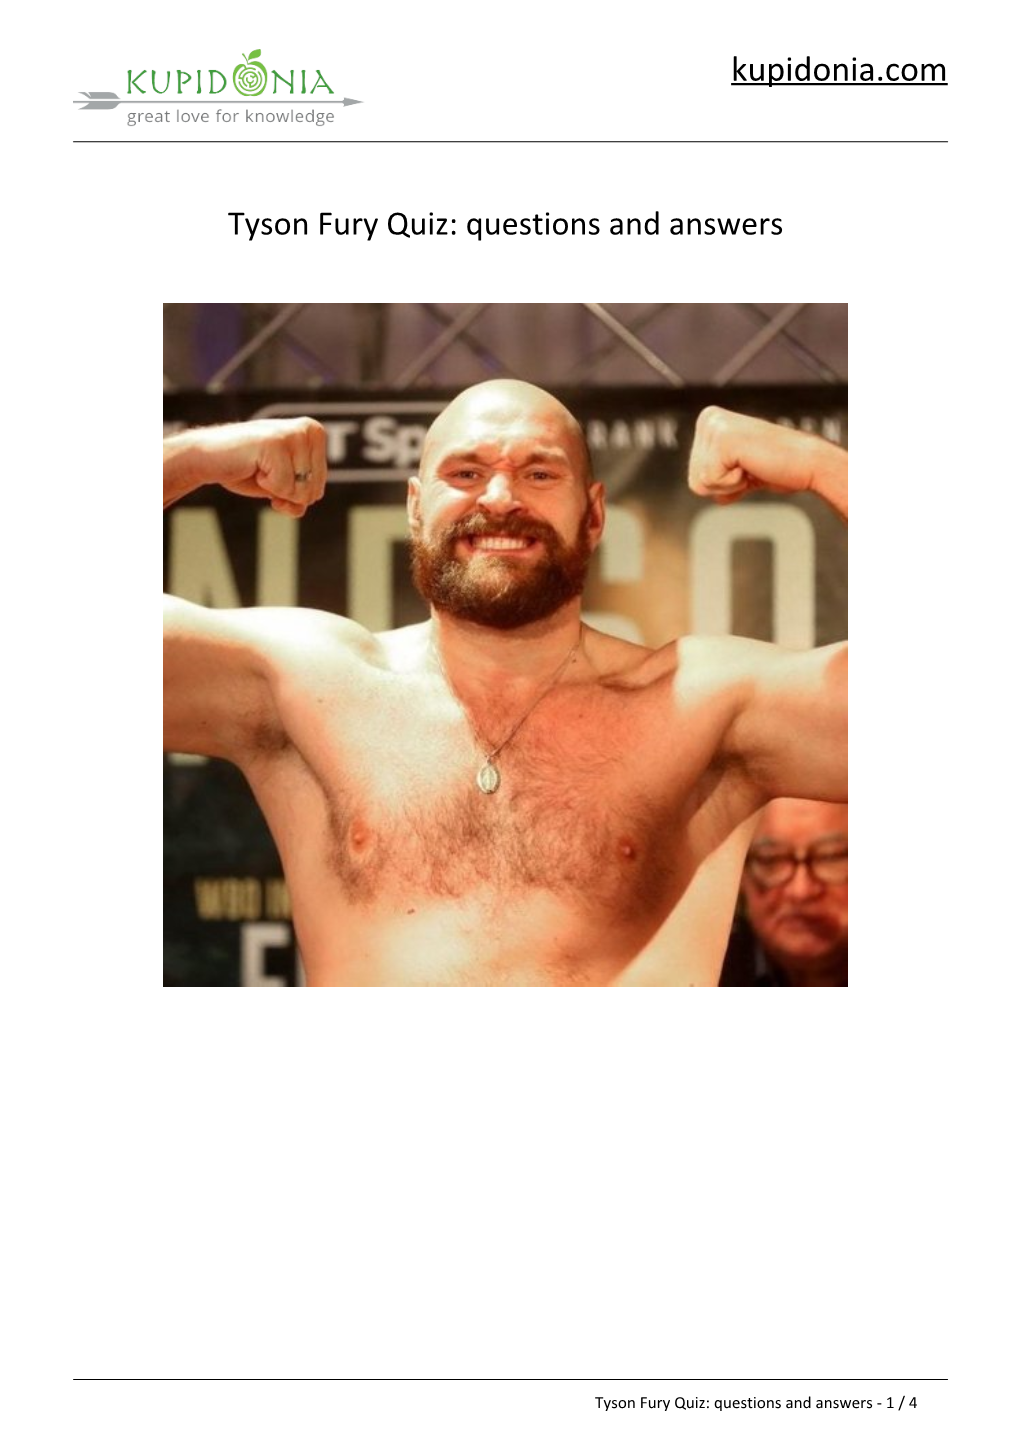 Tyson Fury Quiz: Questions and Answers